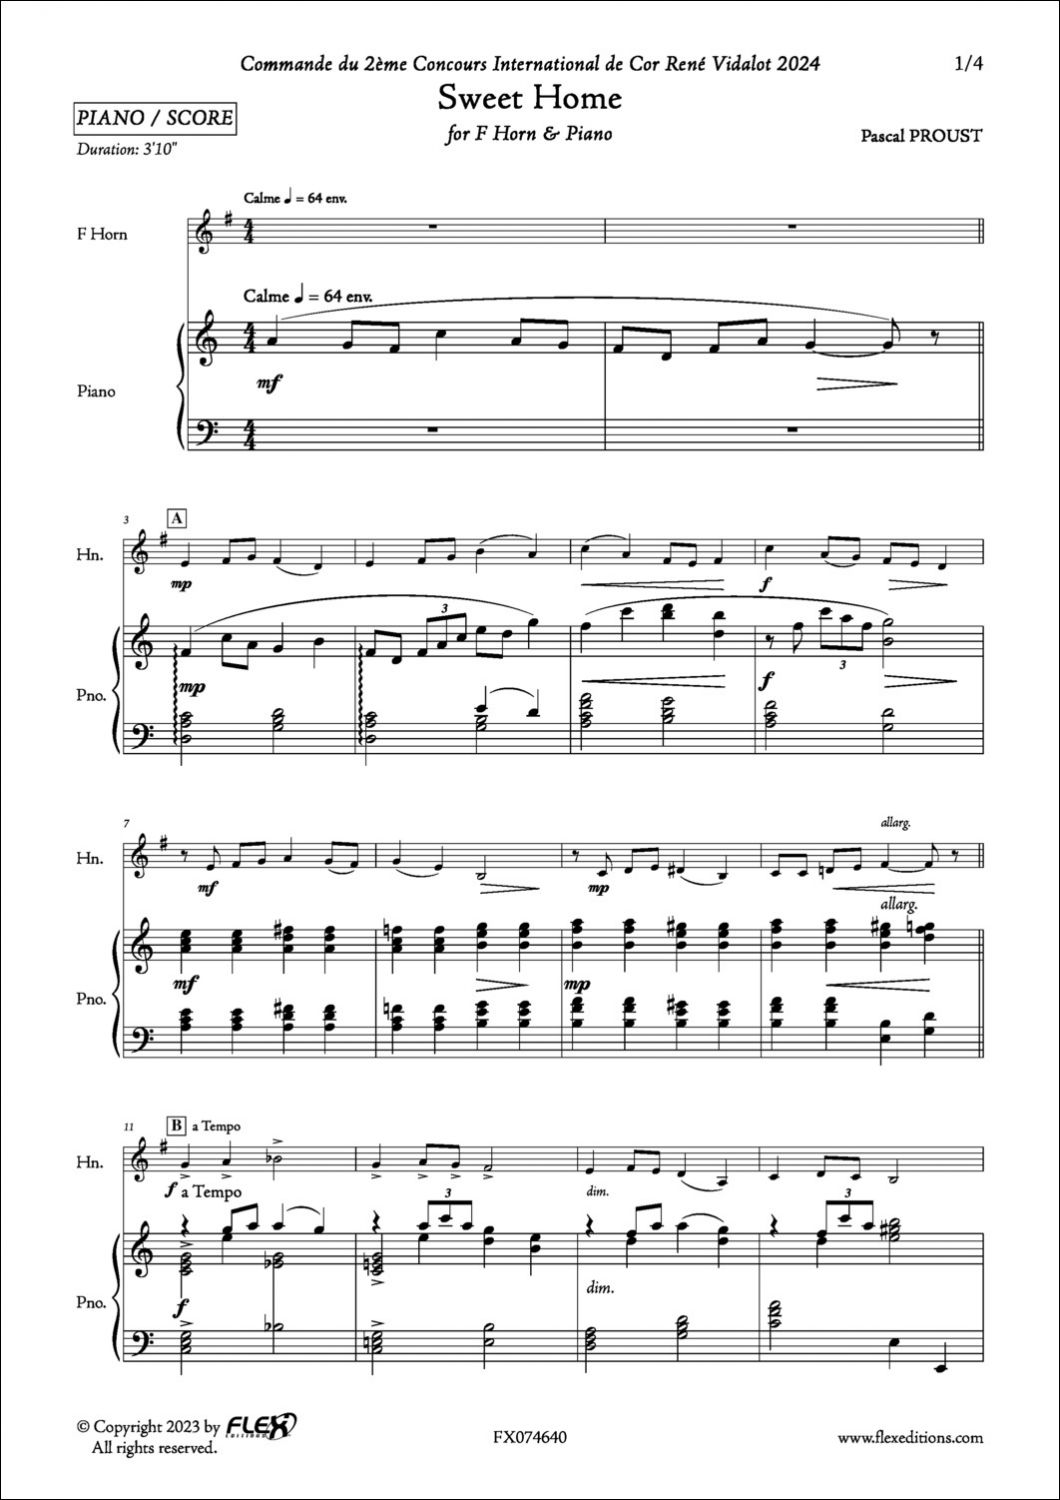 Sweet Home - P. PROUST - <font color=#666666>Horn and Piano</font>